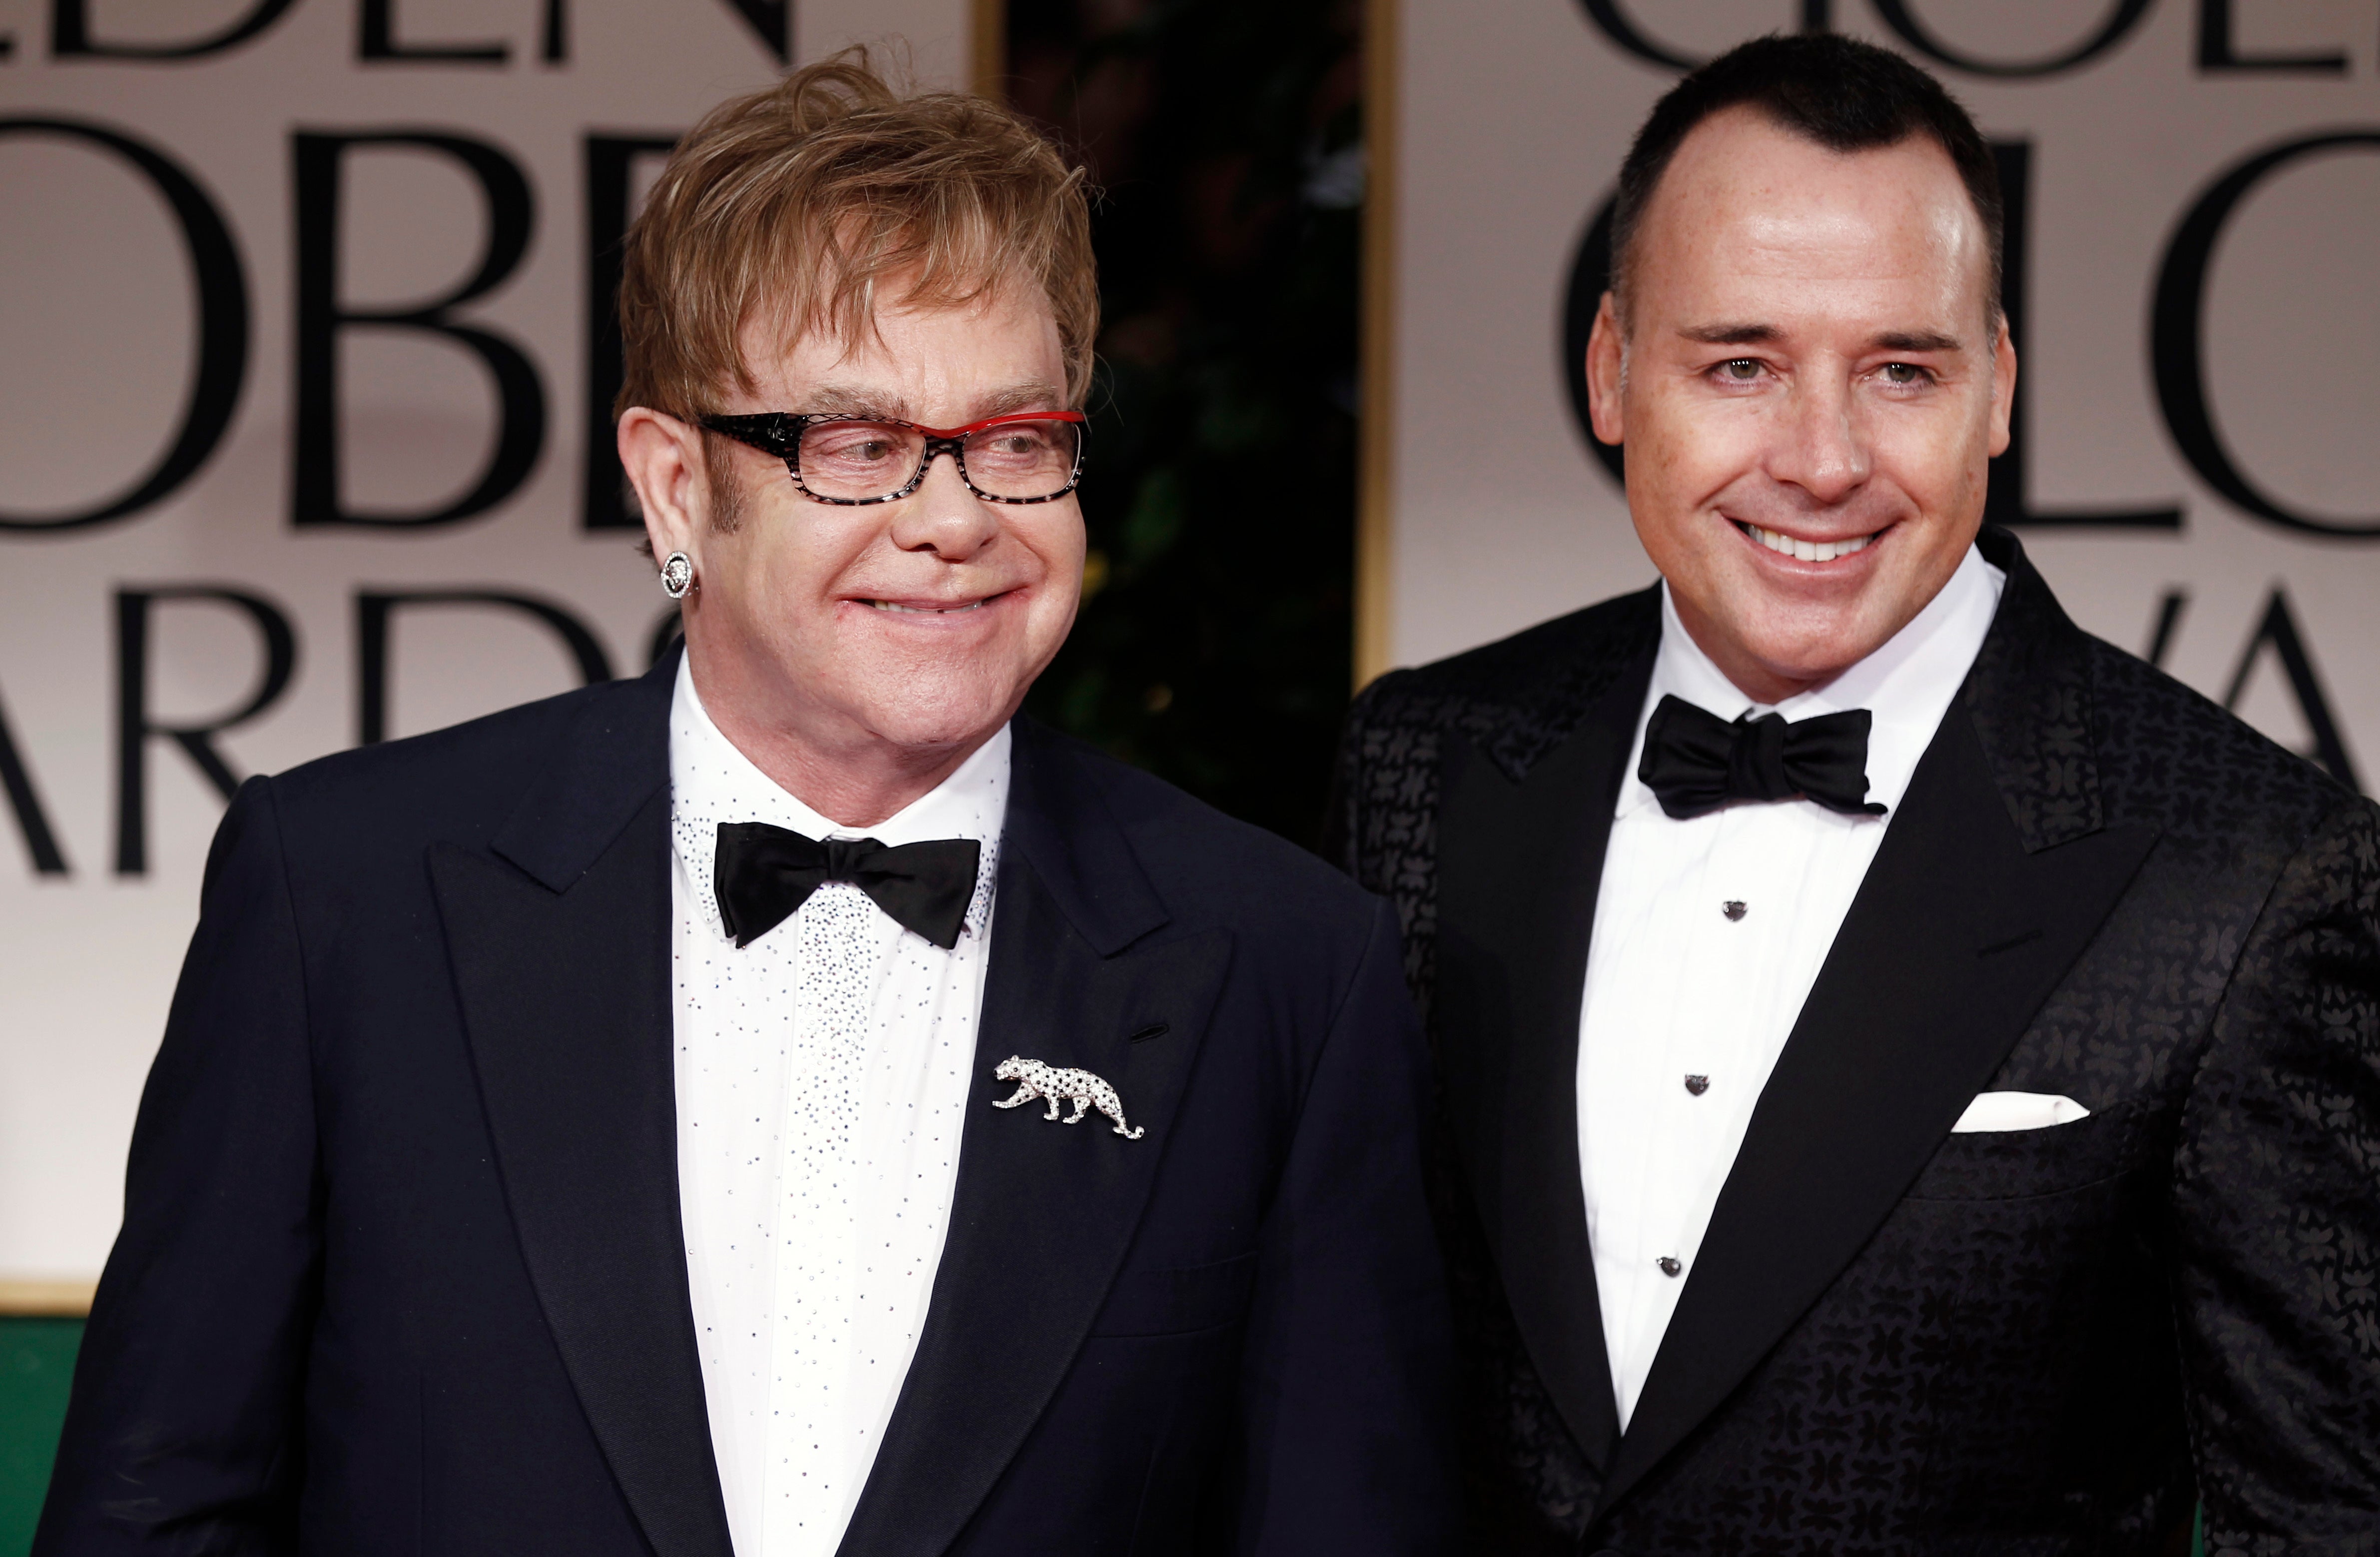 Kevin Spacey spoke of the support Elton John and his husband David Furnish (pictured) offered as he faces trials on allegations of sexual assault.